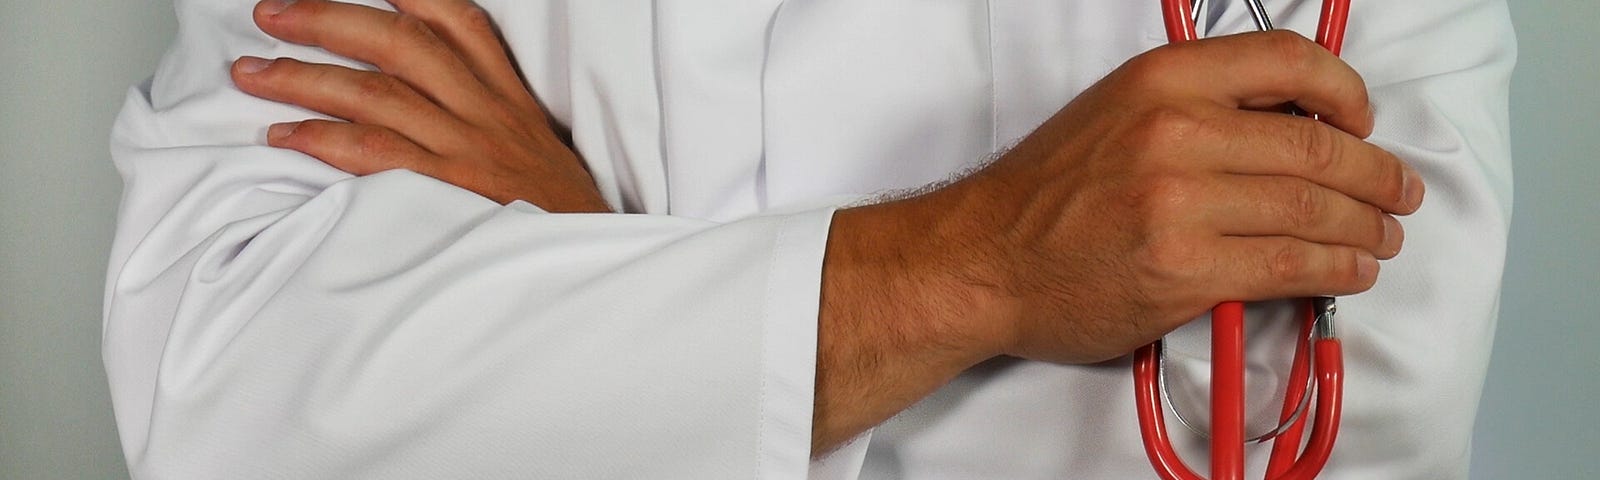 cropped photo showing the chest and arms of a man in a white coat who is holding a stethoscope with his arms crossed.